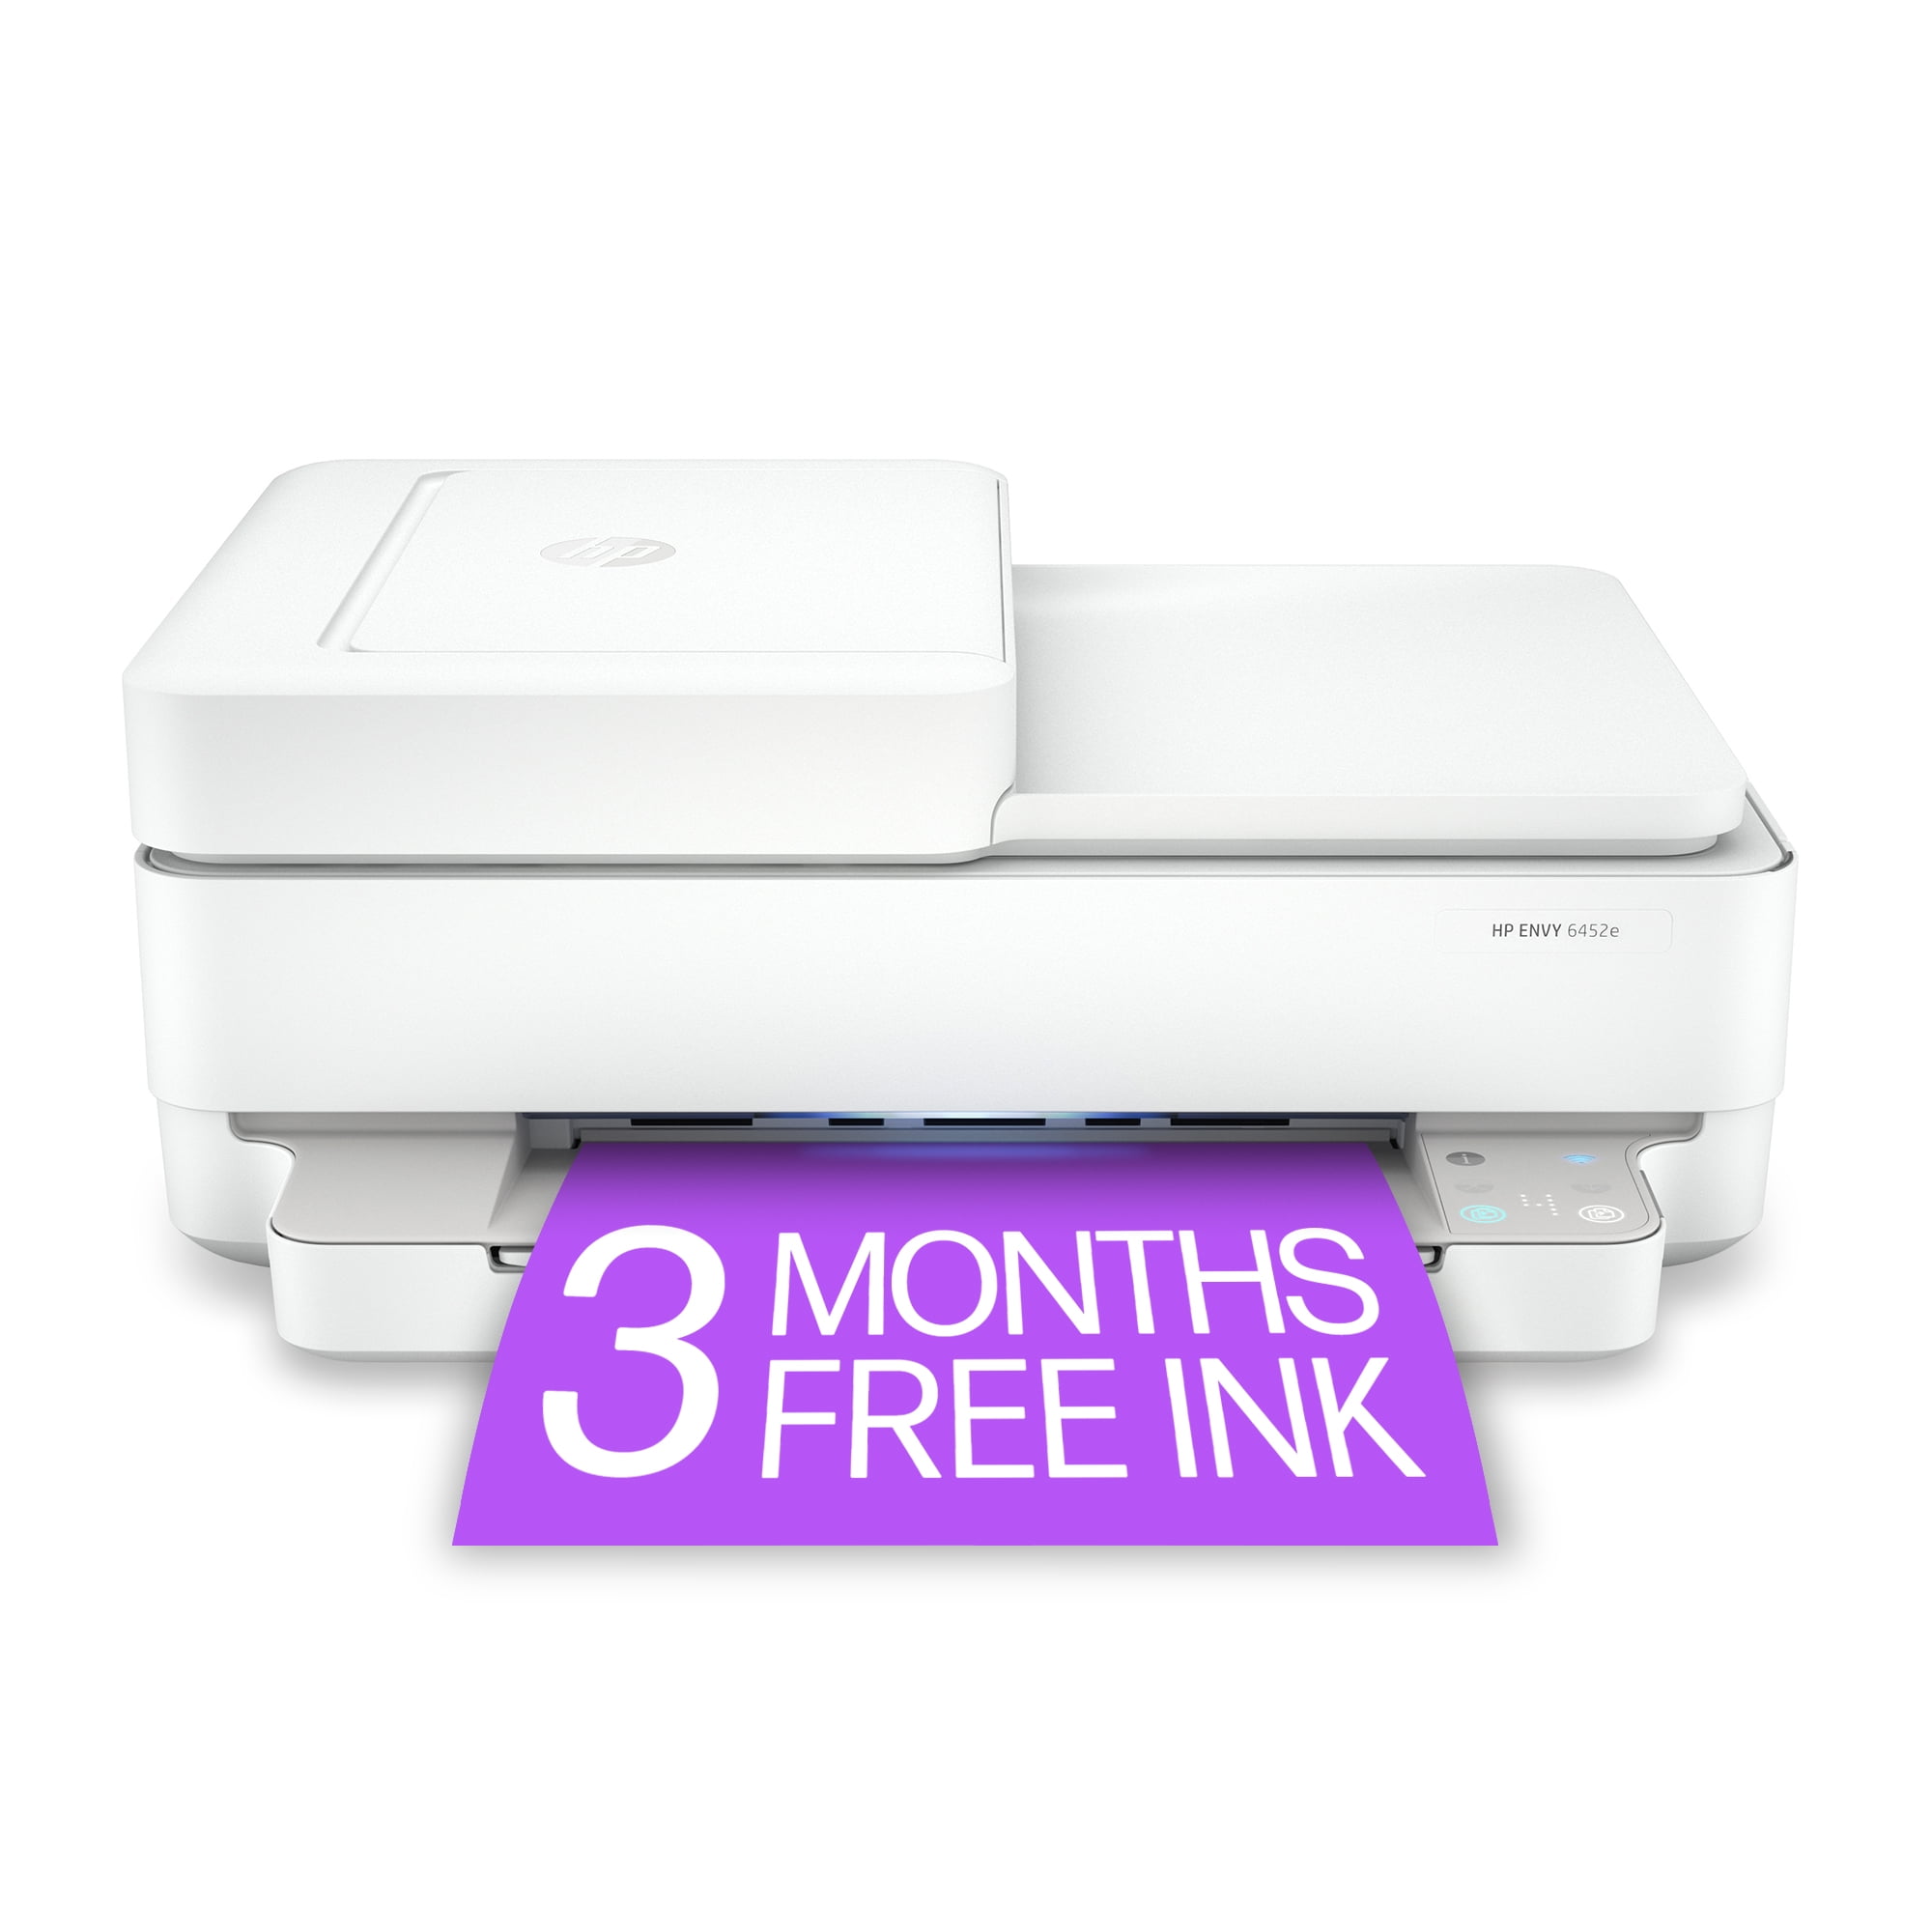 HP ENVY 6452e Wireless Color Inkjet Printer with 3 Months Instant Ink Included with - Walmart.com